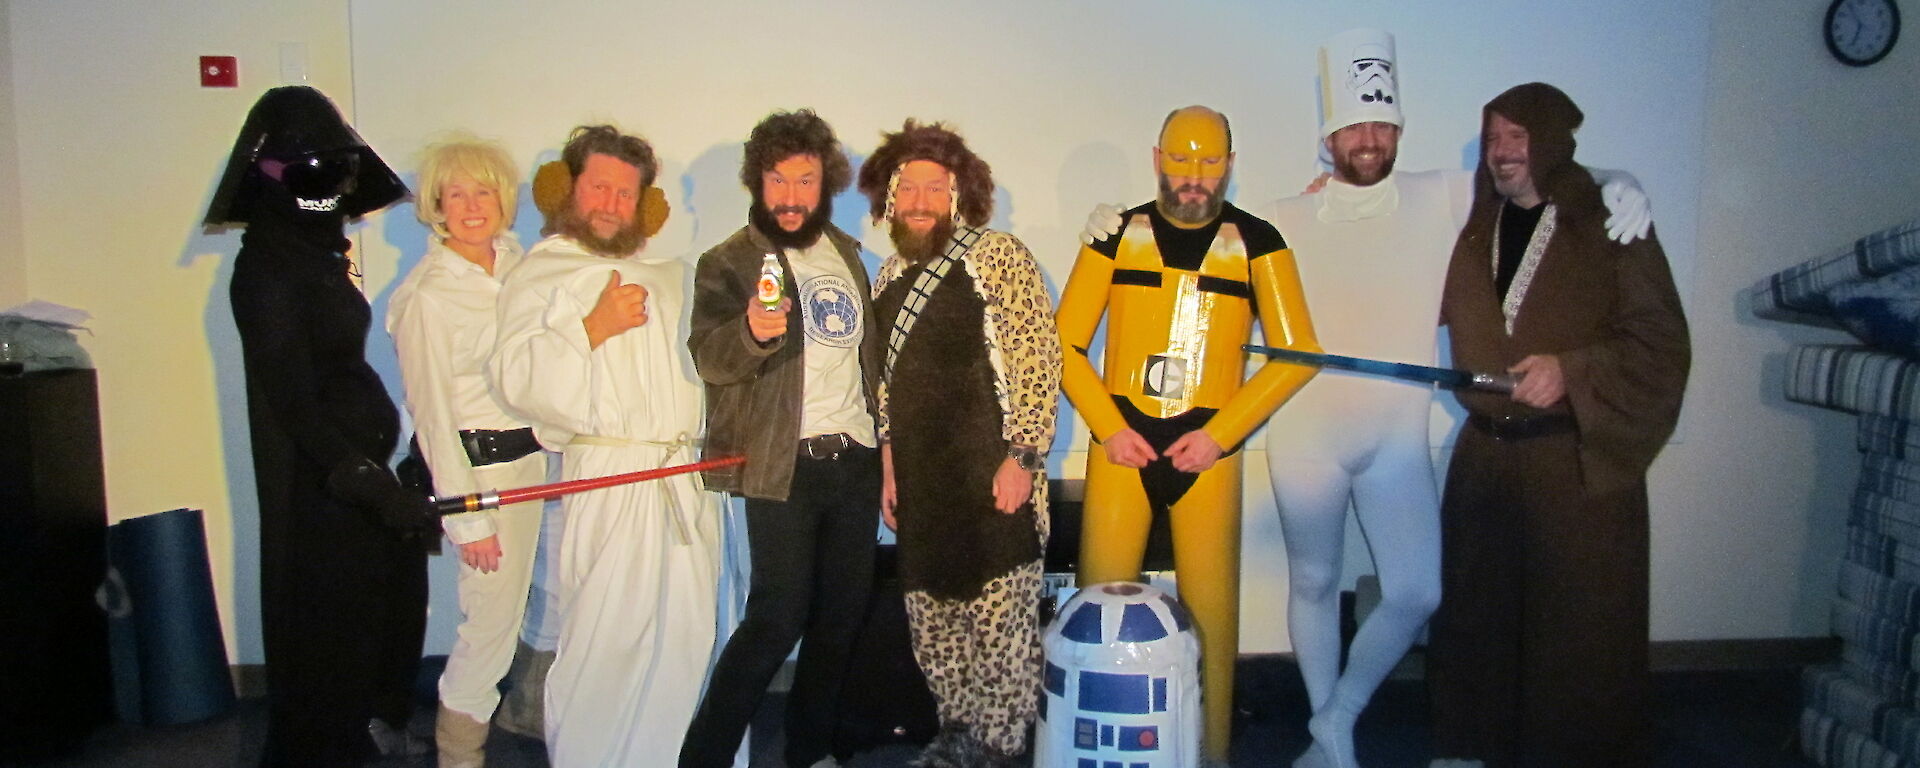 People dressed as characters from Star Wars.